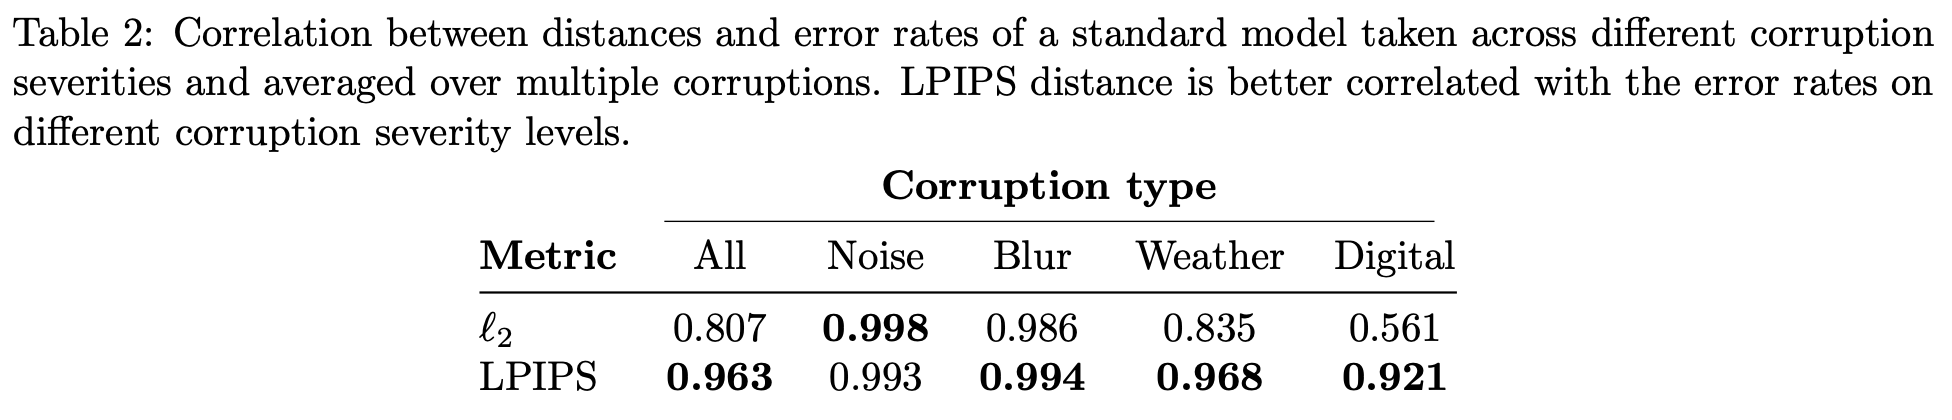 lpips_is_better_correlated.png